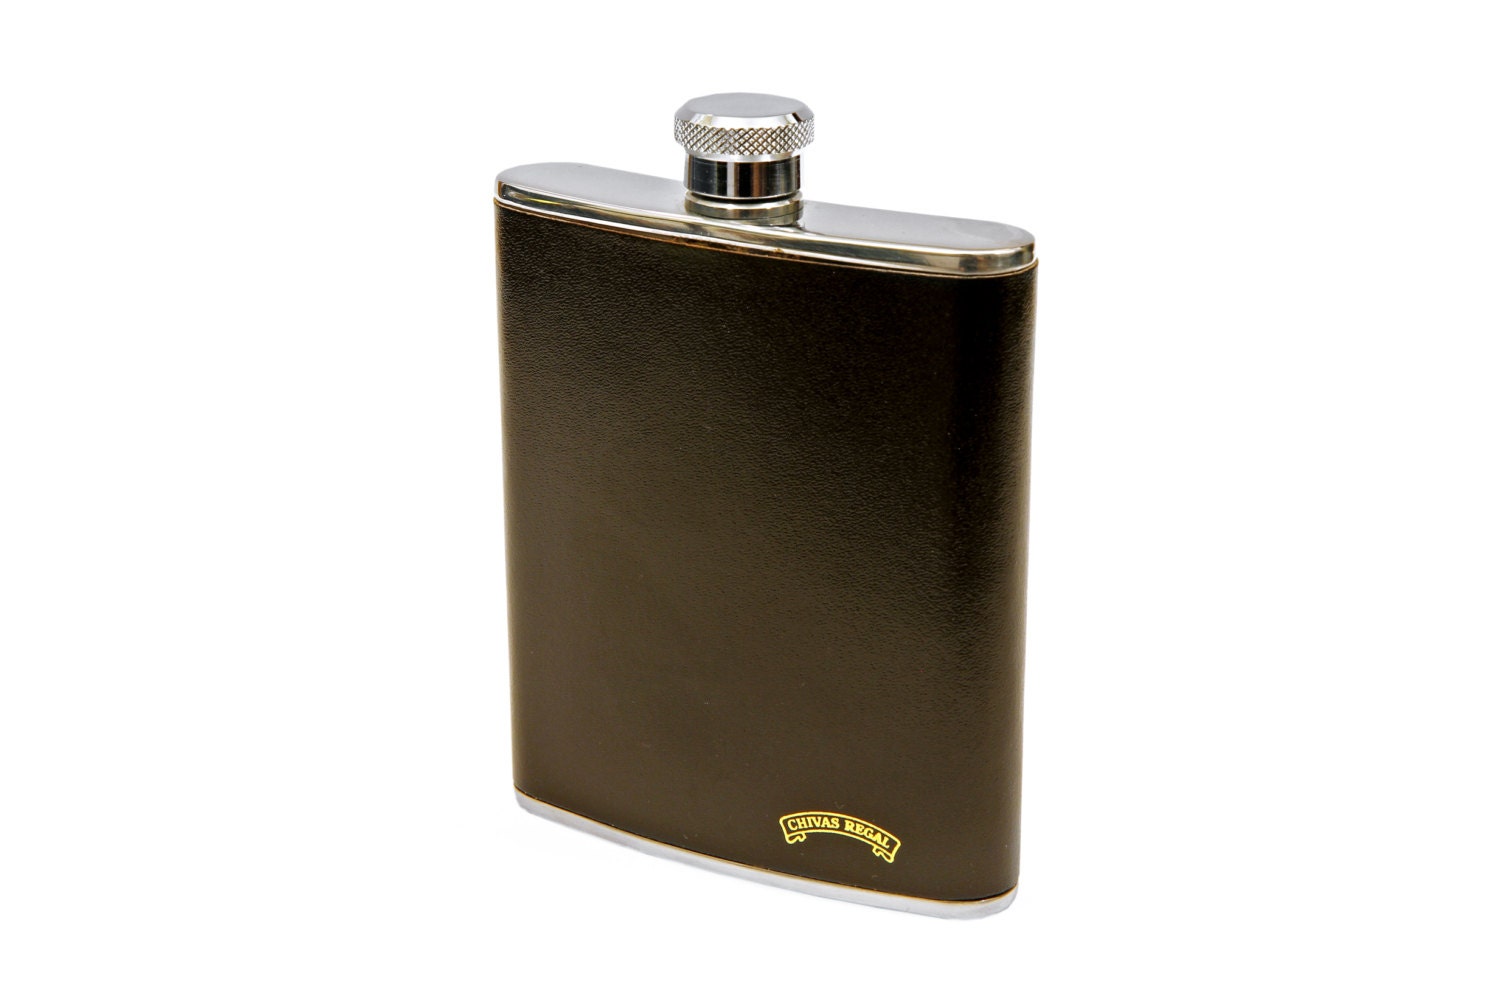 Leather Hip Flask CHIVAS REGAL Boxed English Whiskey Flask